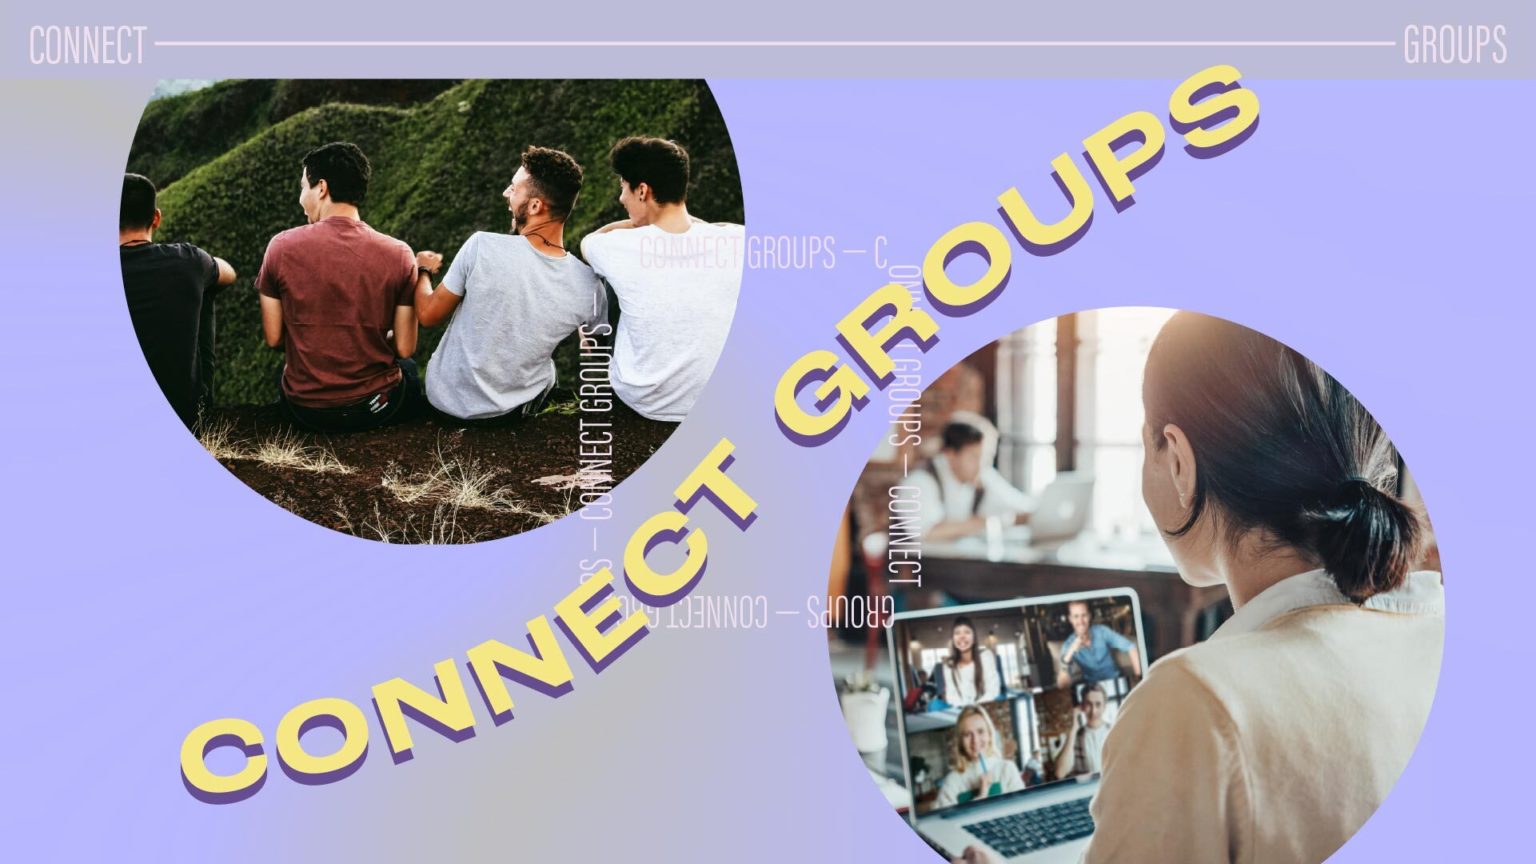 Featured image for “CONNECT GROUPS”